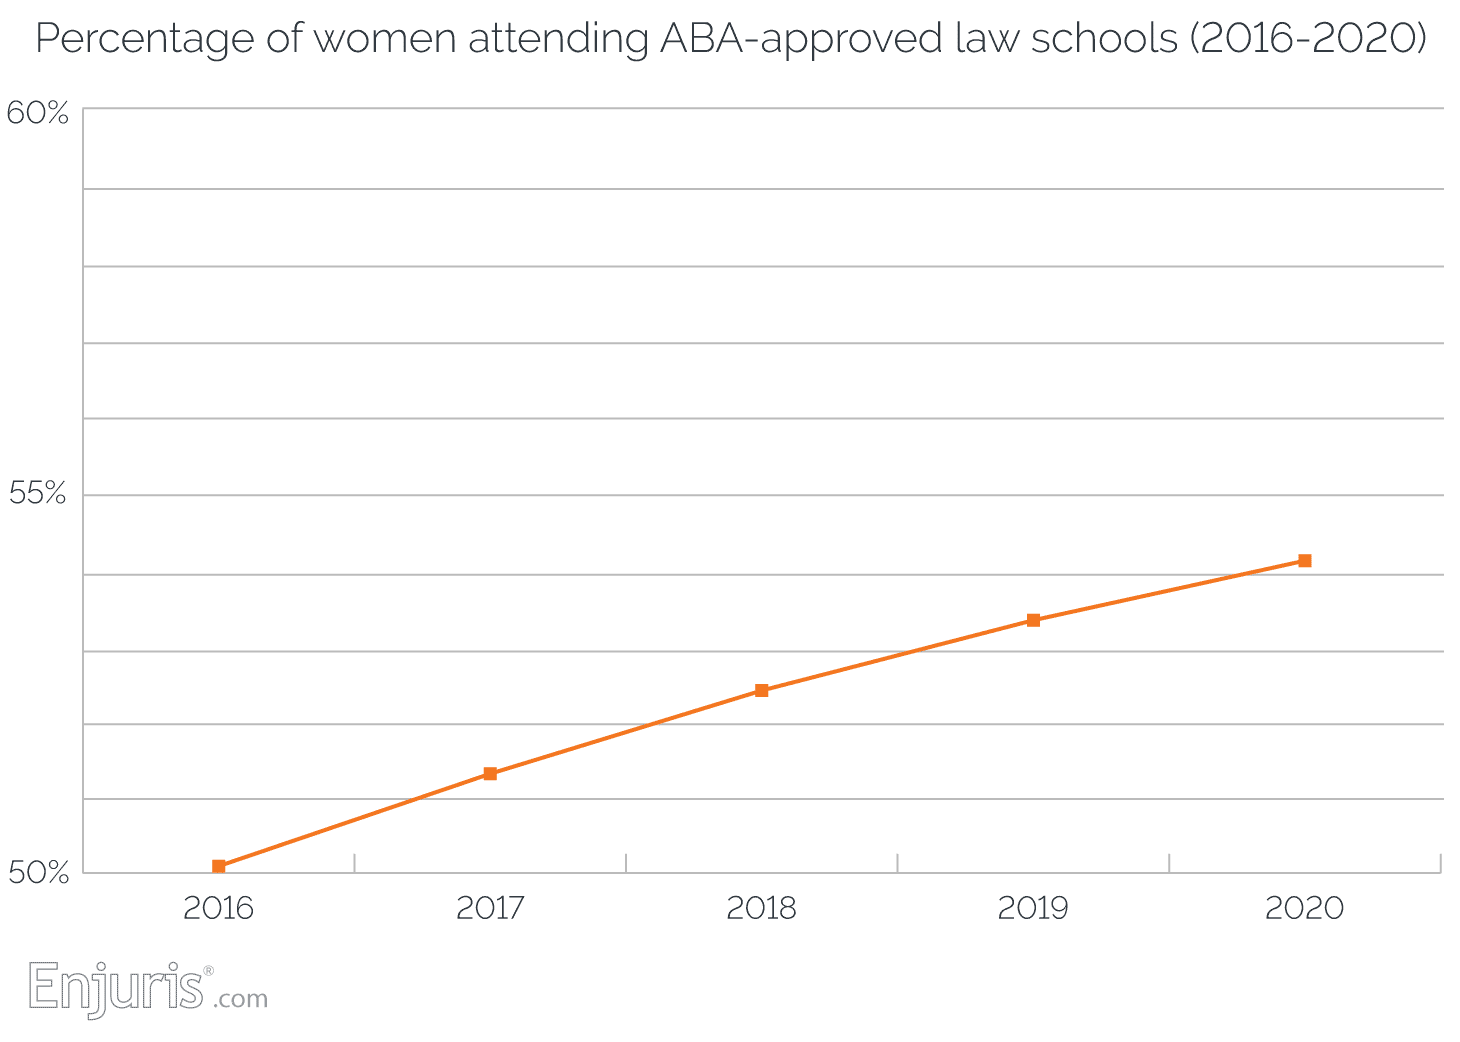 Percentage of women attending ABA-approved law schools (2016-2020)